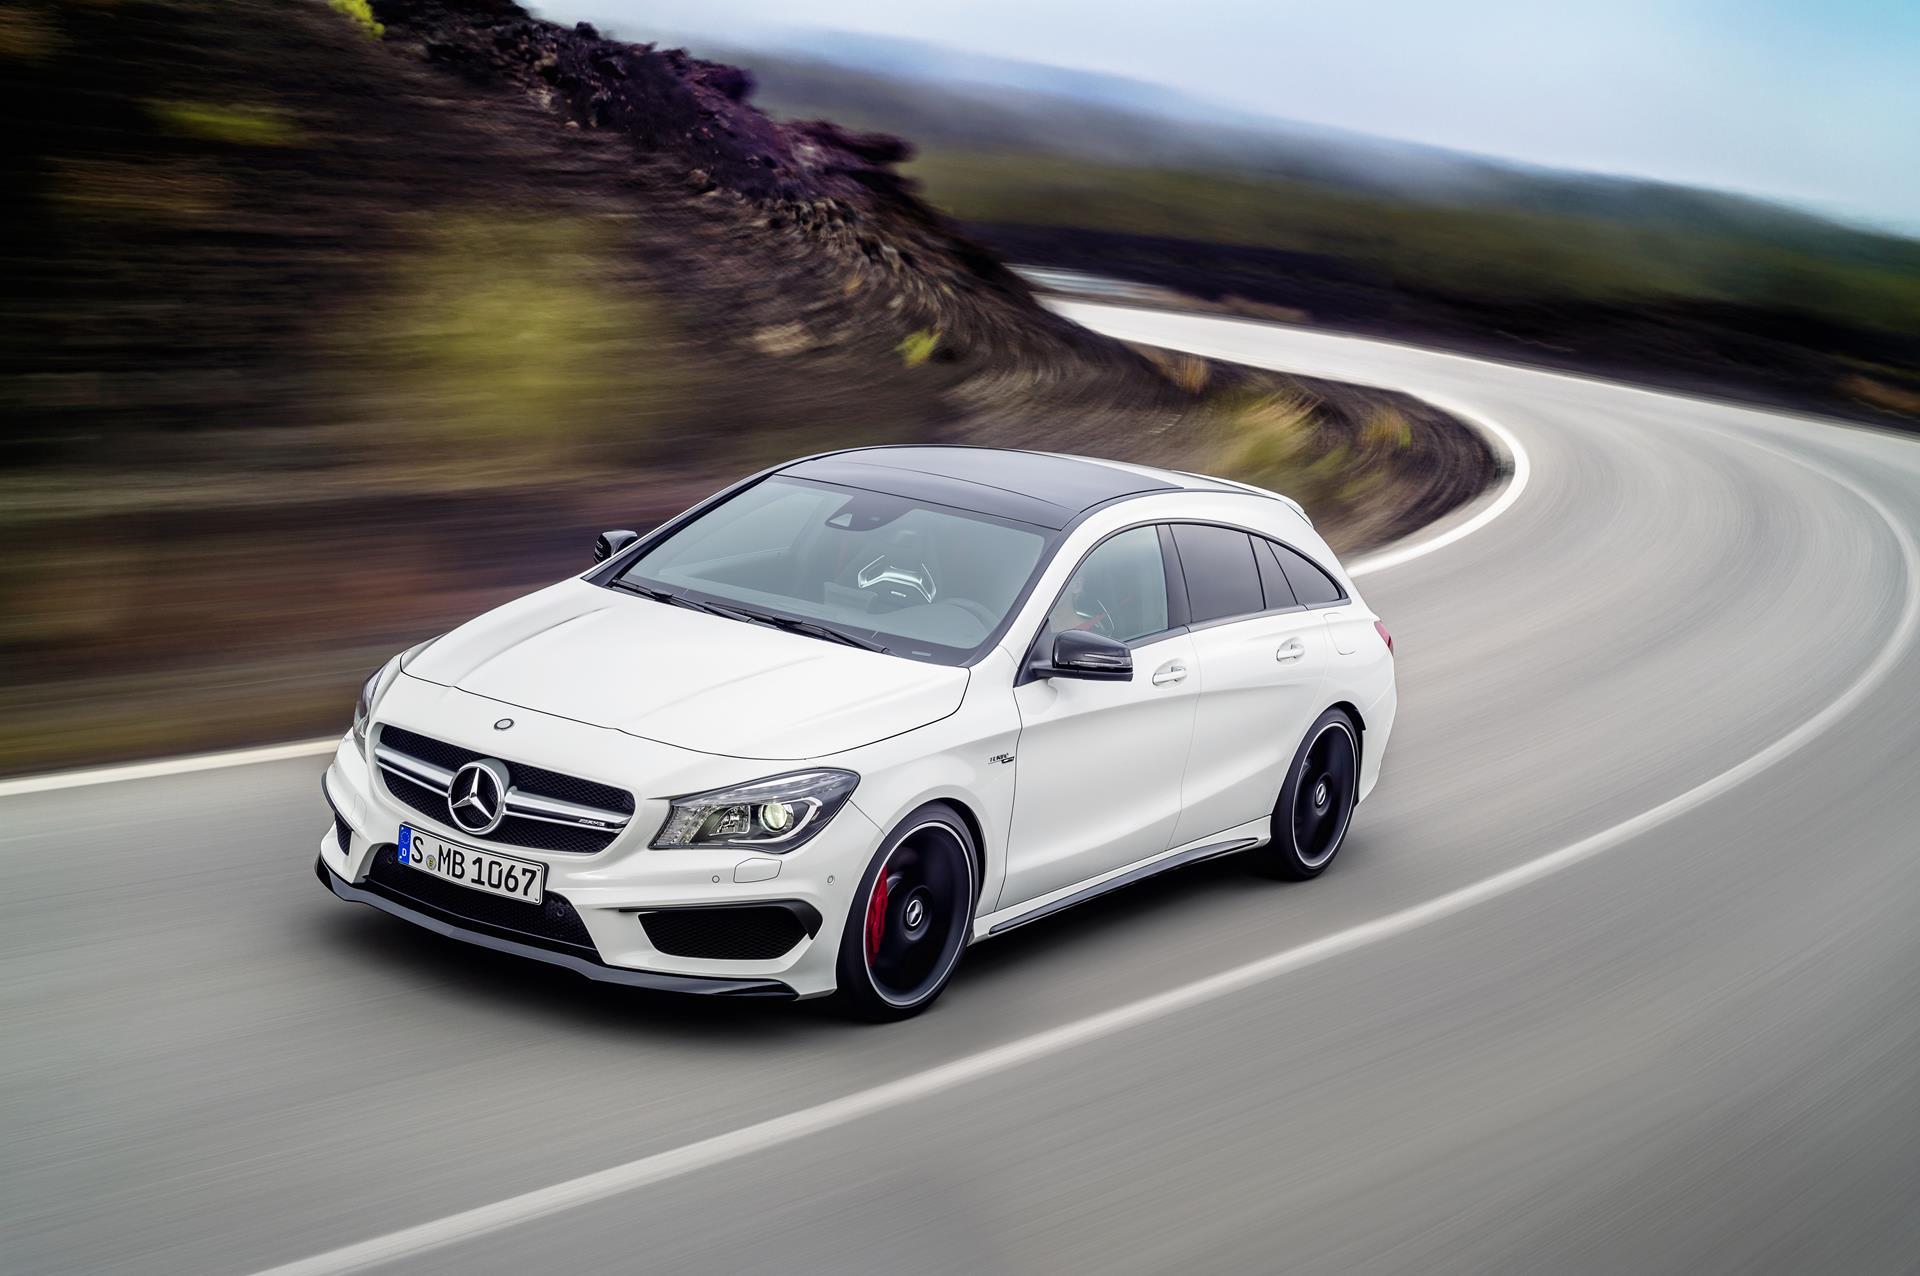 Mercedes Benz CLA 45 AMG Shooting Brake Wallpaper And Image Gallery